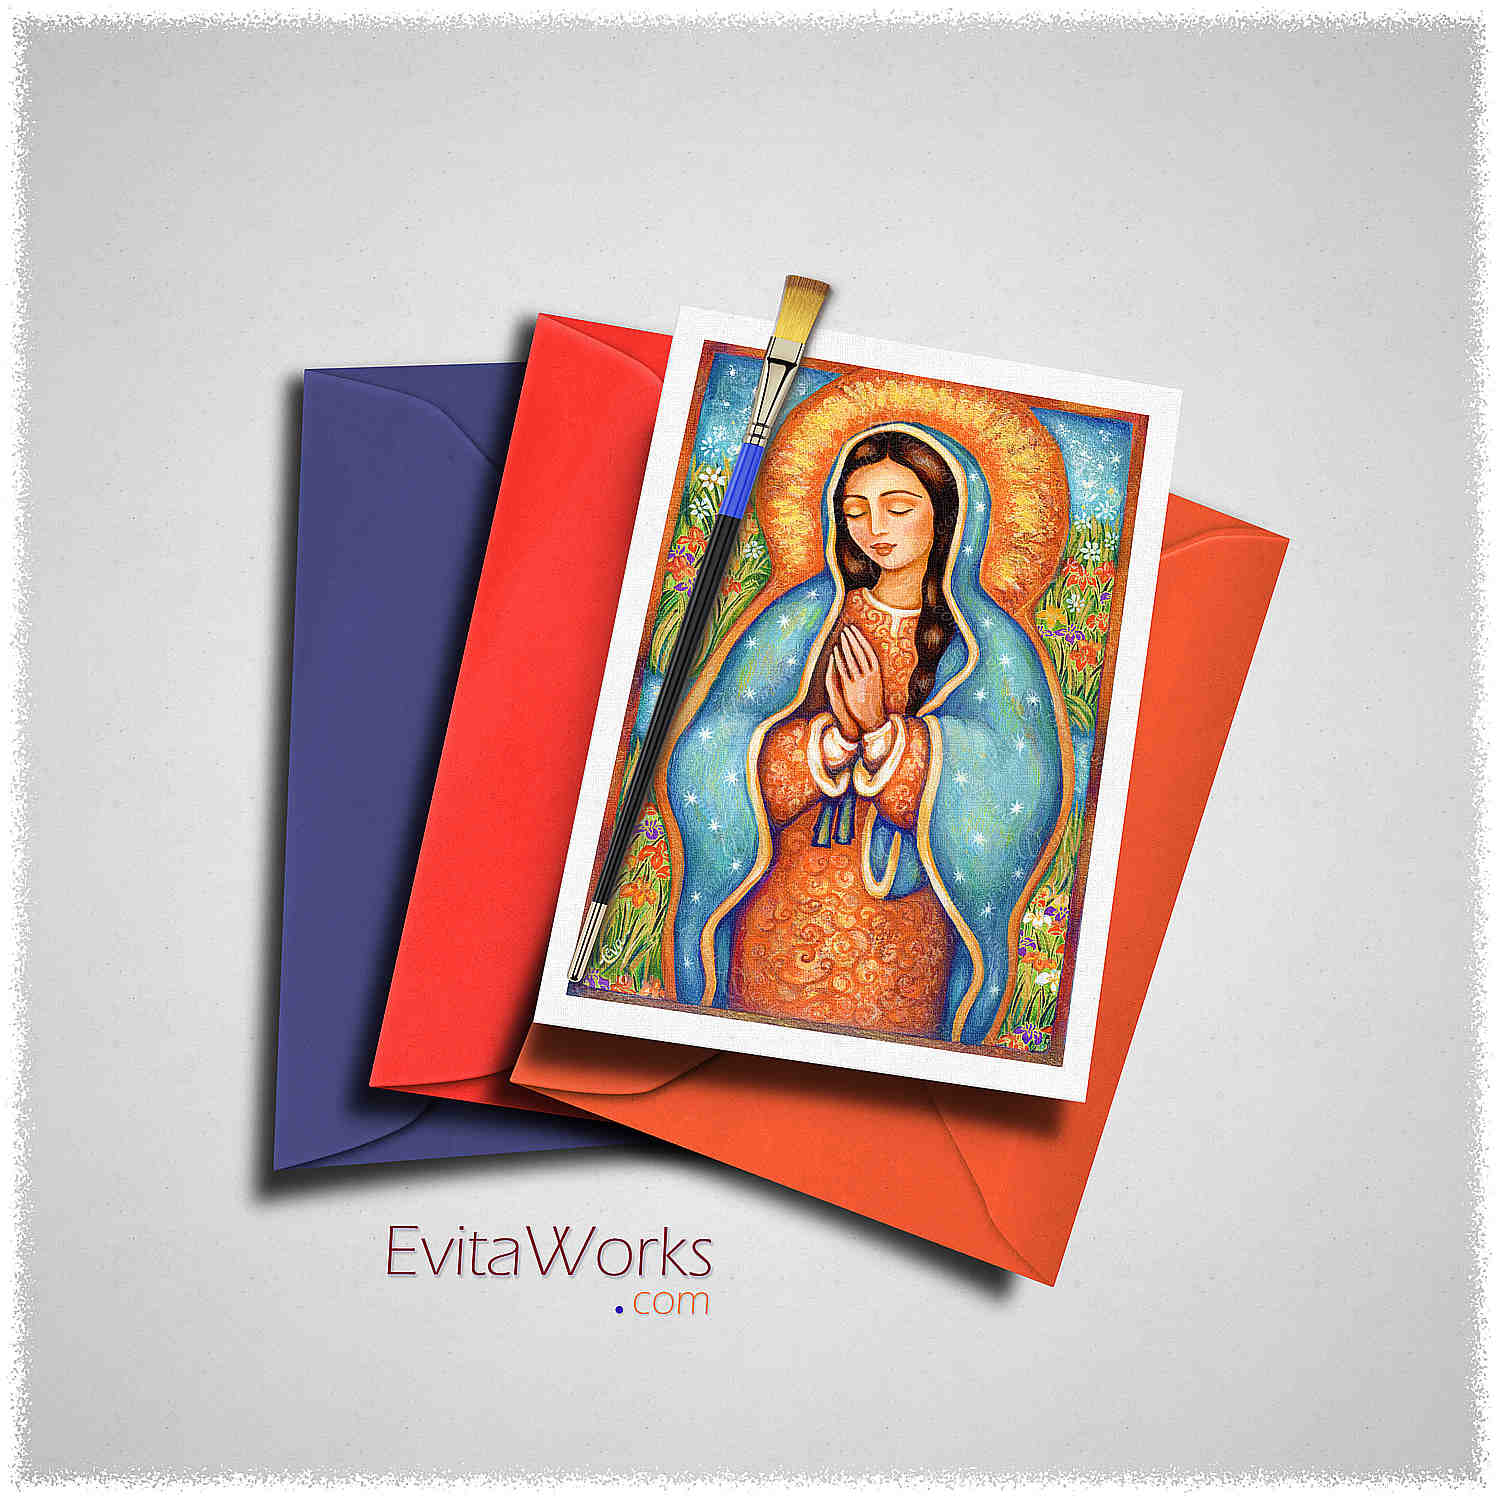 Hit to learn about "The Virgin of Guadalupe" on cards